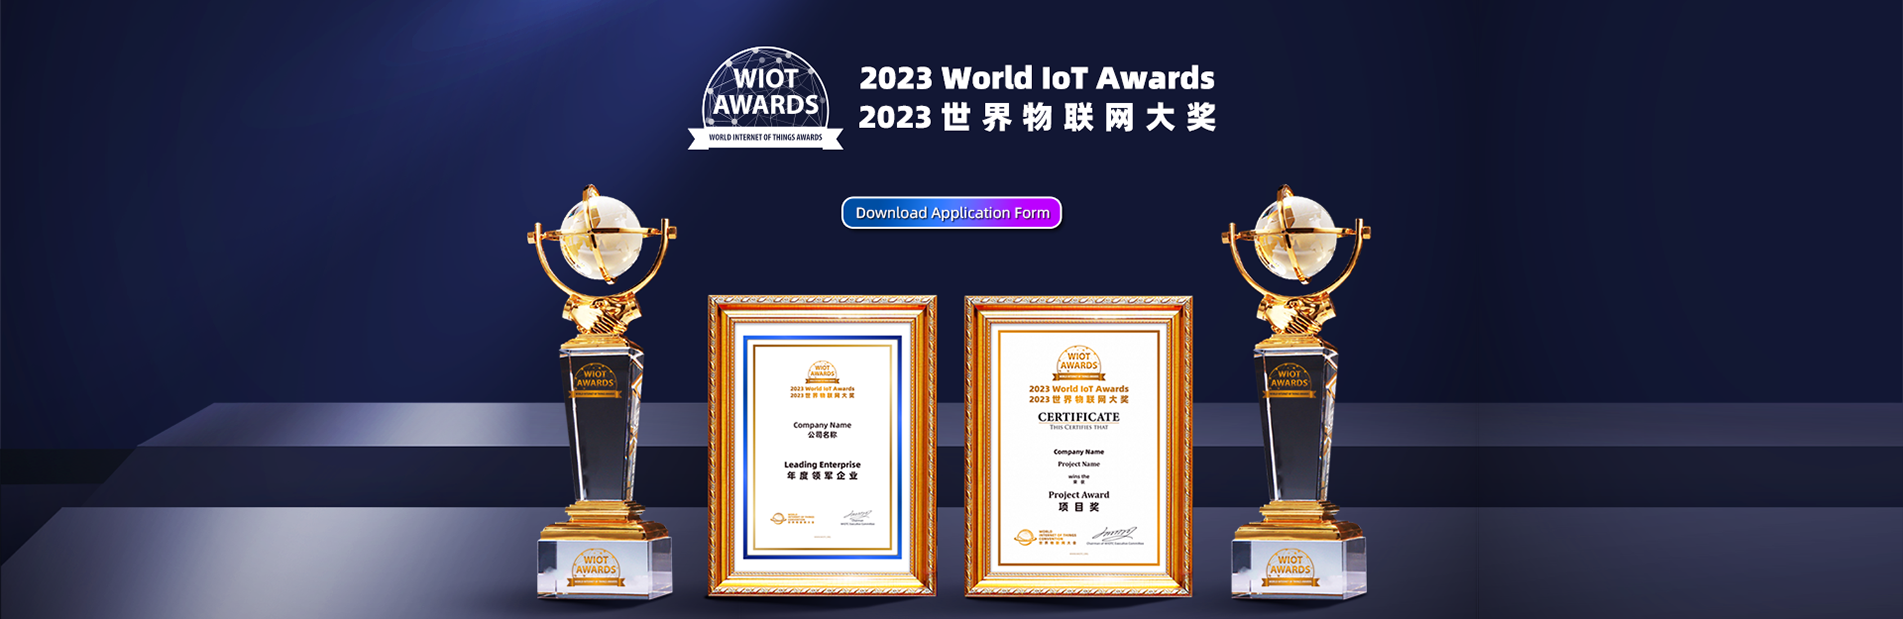 CALL FOR APPLICATION | WORLD IOT AWARDS 2023